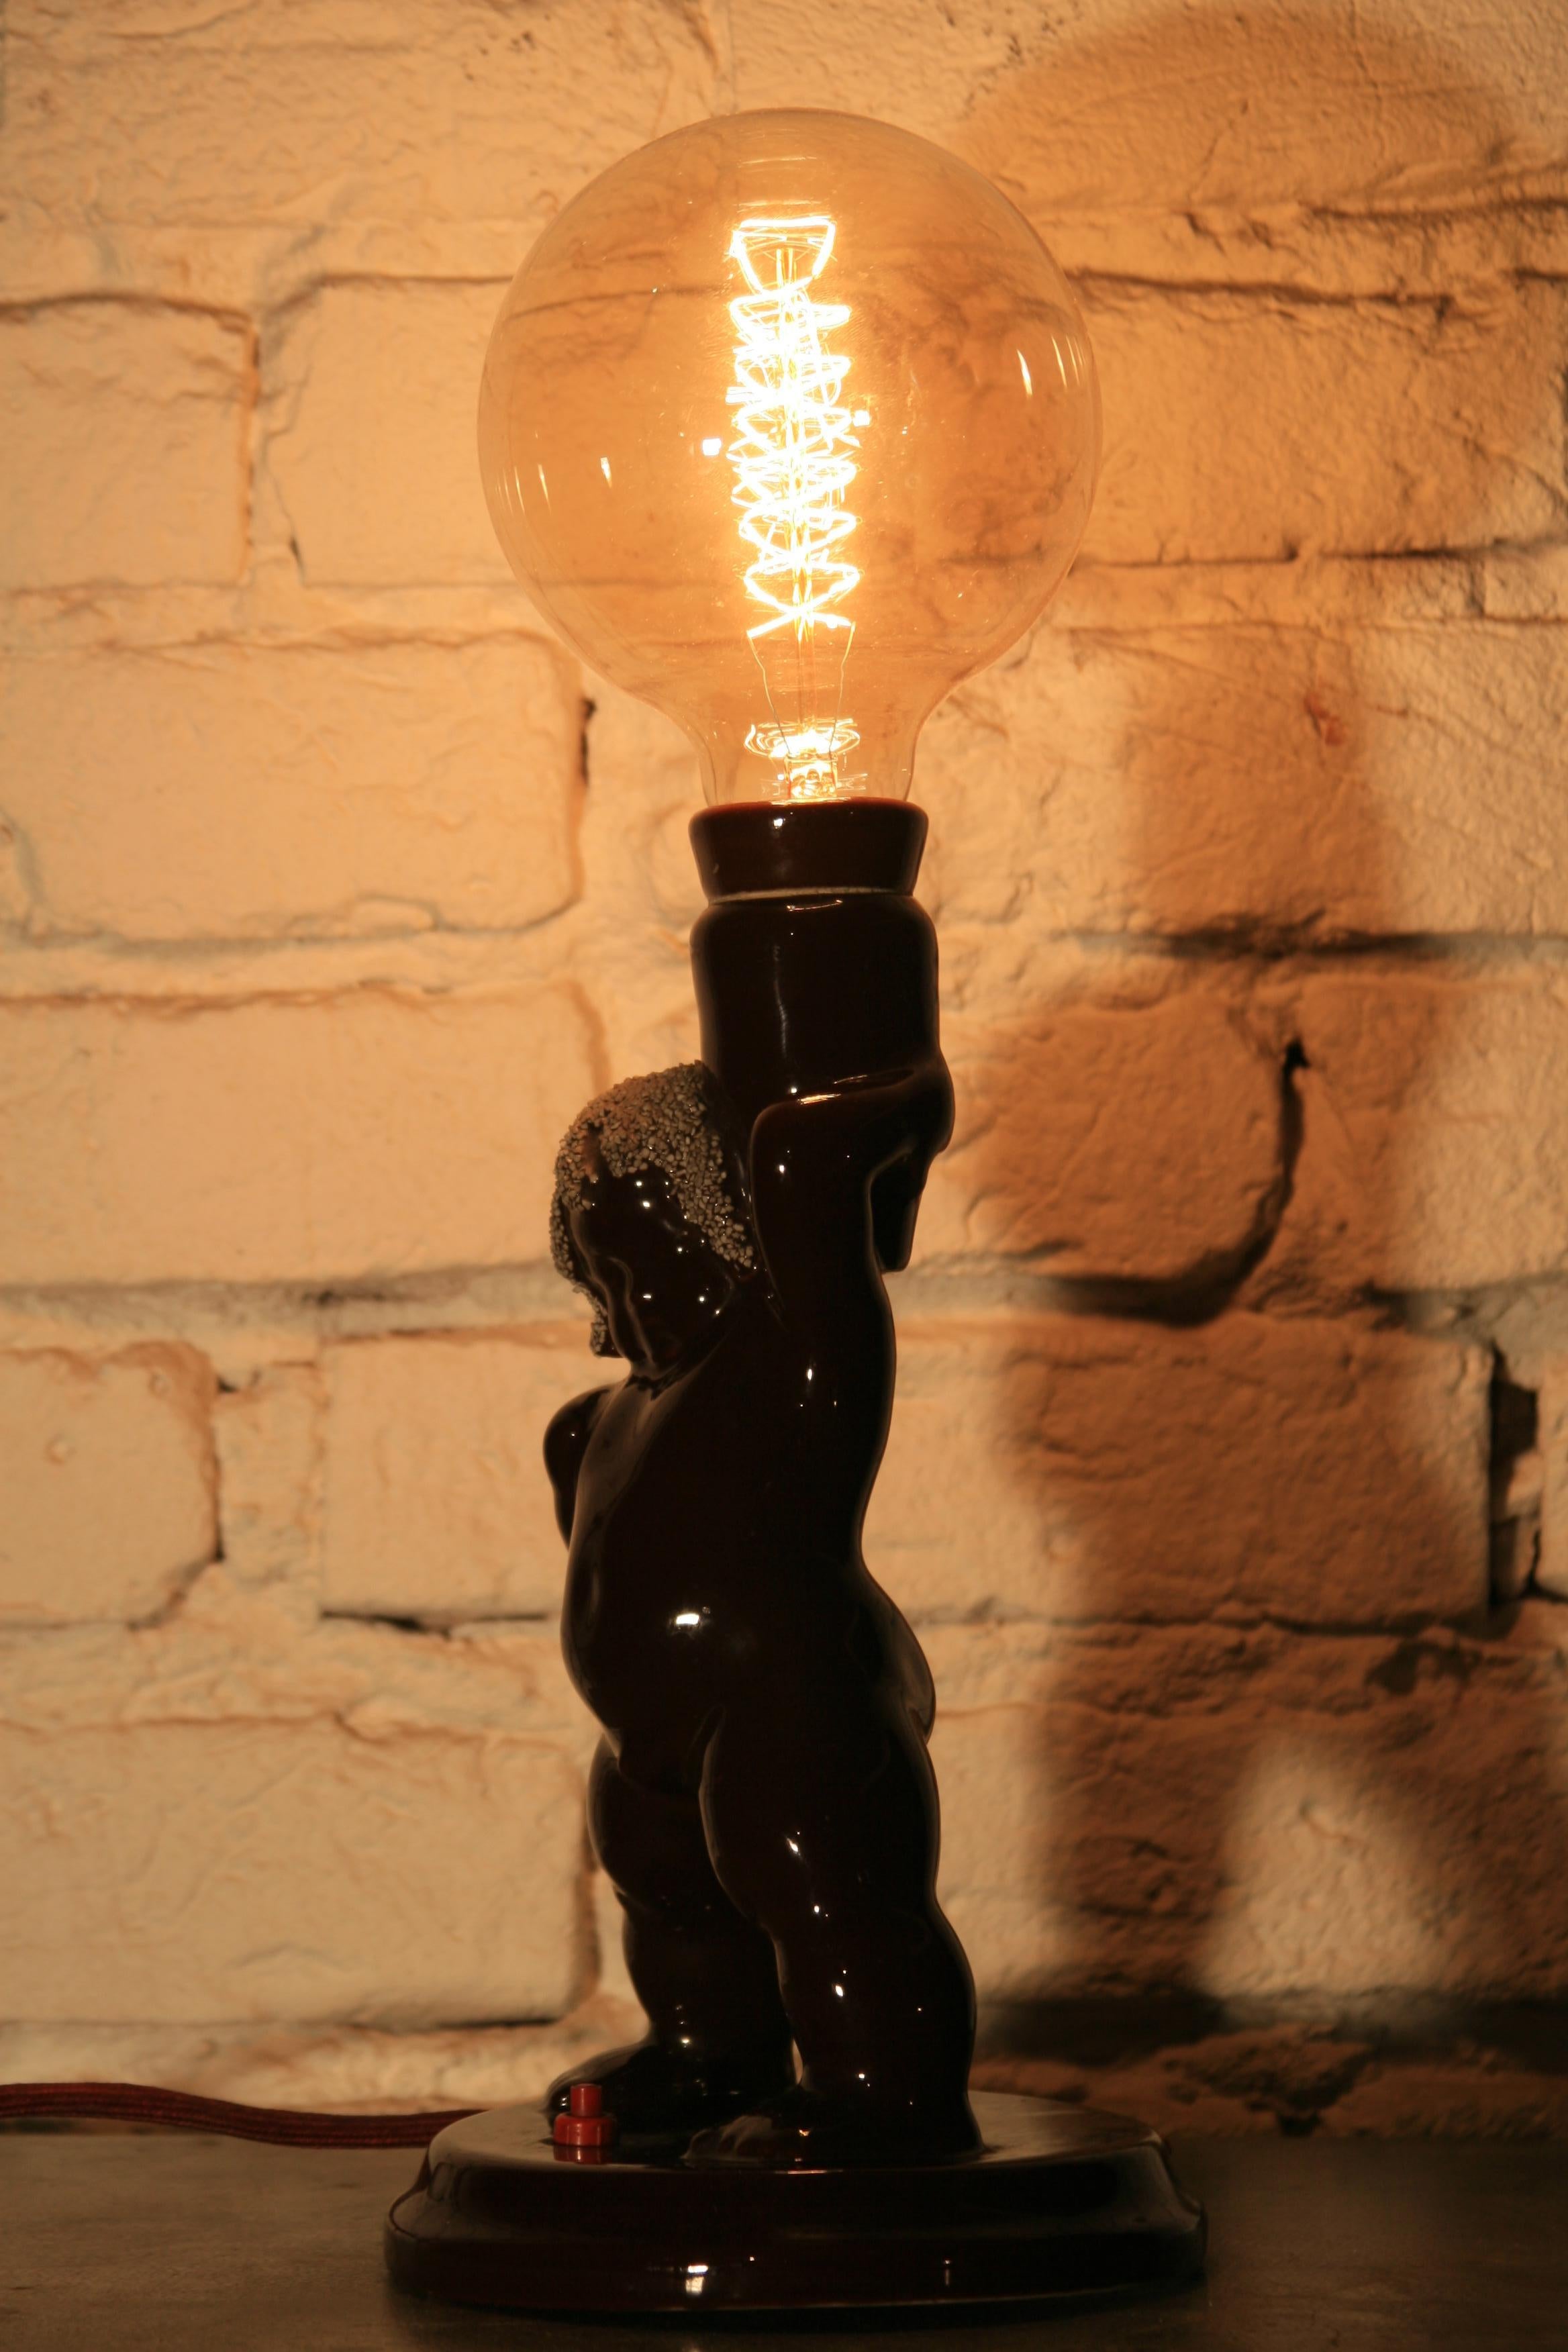 A unique night lamp from the 1950s, made in Poland. Due to a very limited series of this model, it is one of the few lamps that still exist.
Construction:
The body of the lamp is made of baked ceramic coating with varnish. The imitation of the